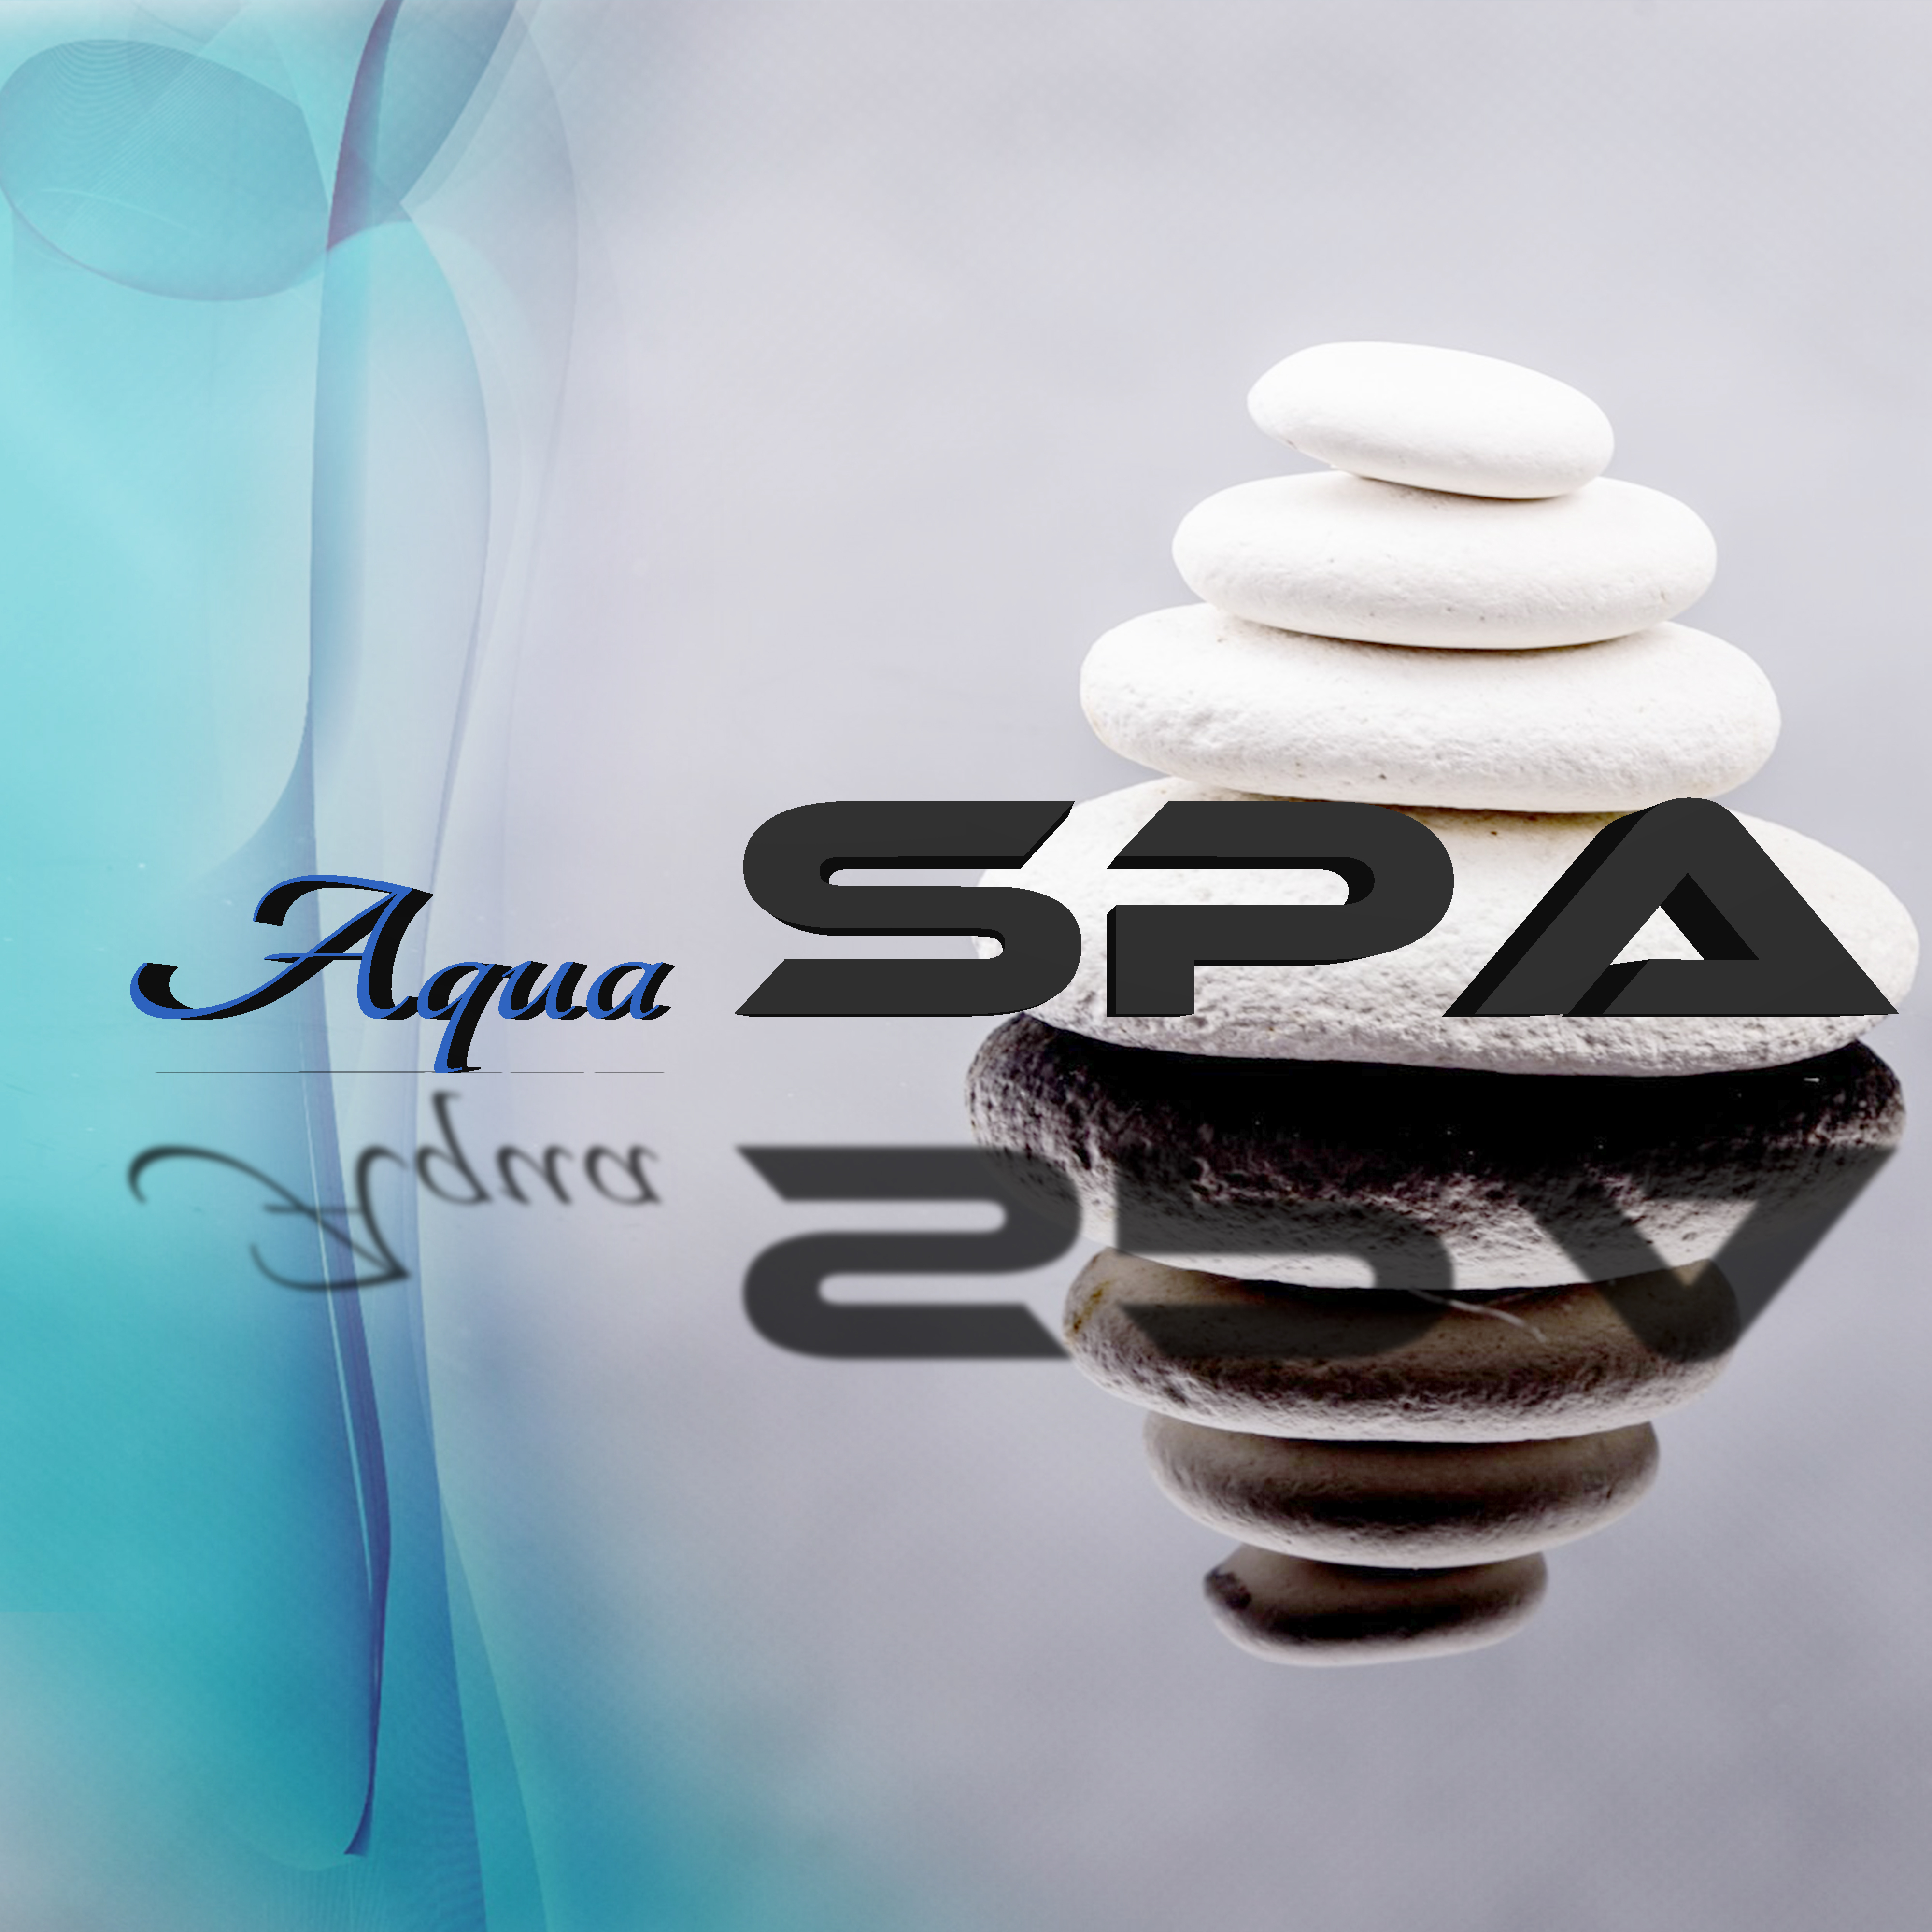 Aqua Spa - New Age Meditation and Relaxation for Aqua Day Spa, Sounds of Nature for Center Hotel Spa, Gentle Massage Music for Aromatherapy, Background Music for Inner Peace